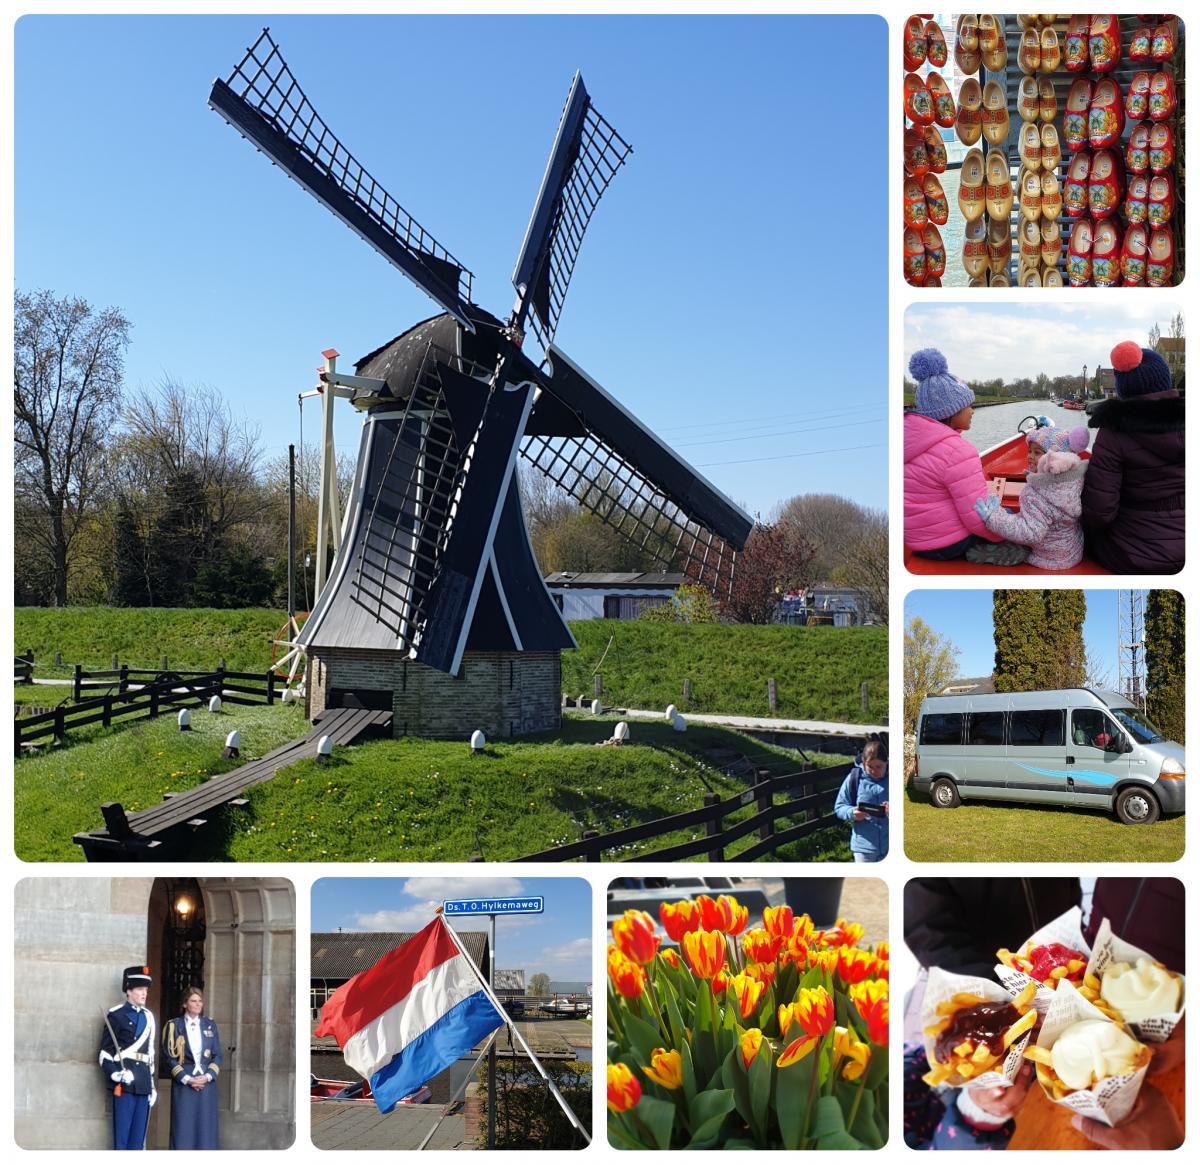 Road trip to Netherlands